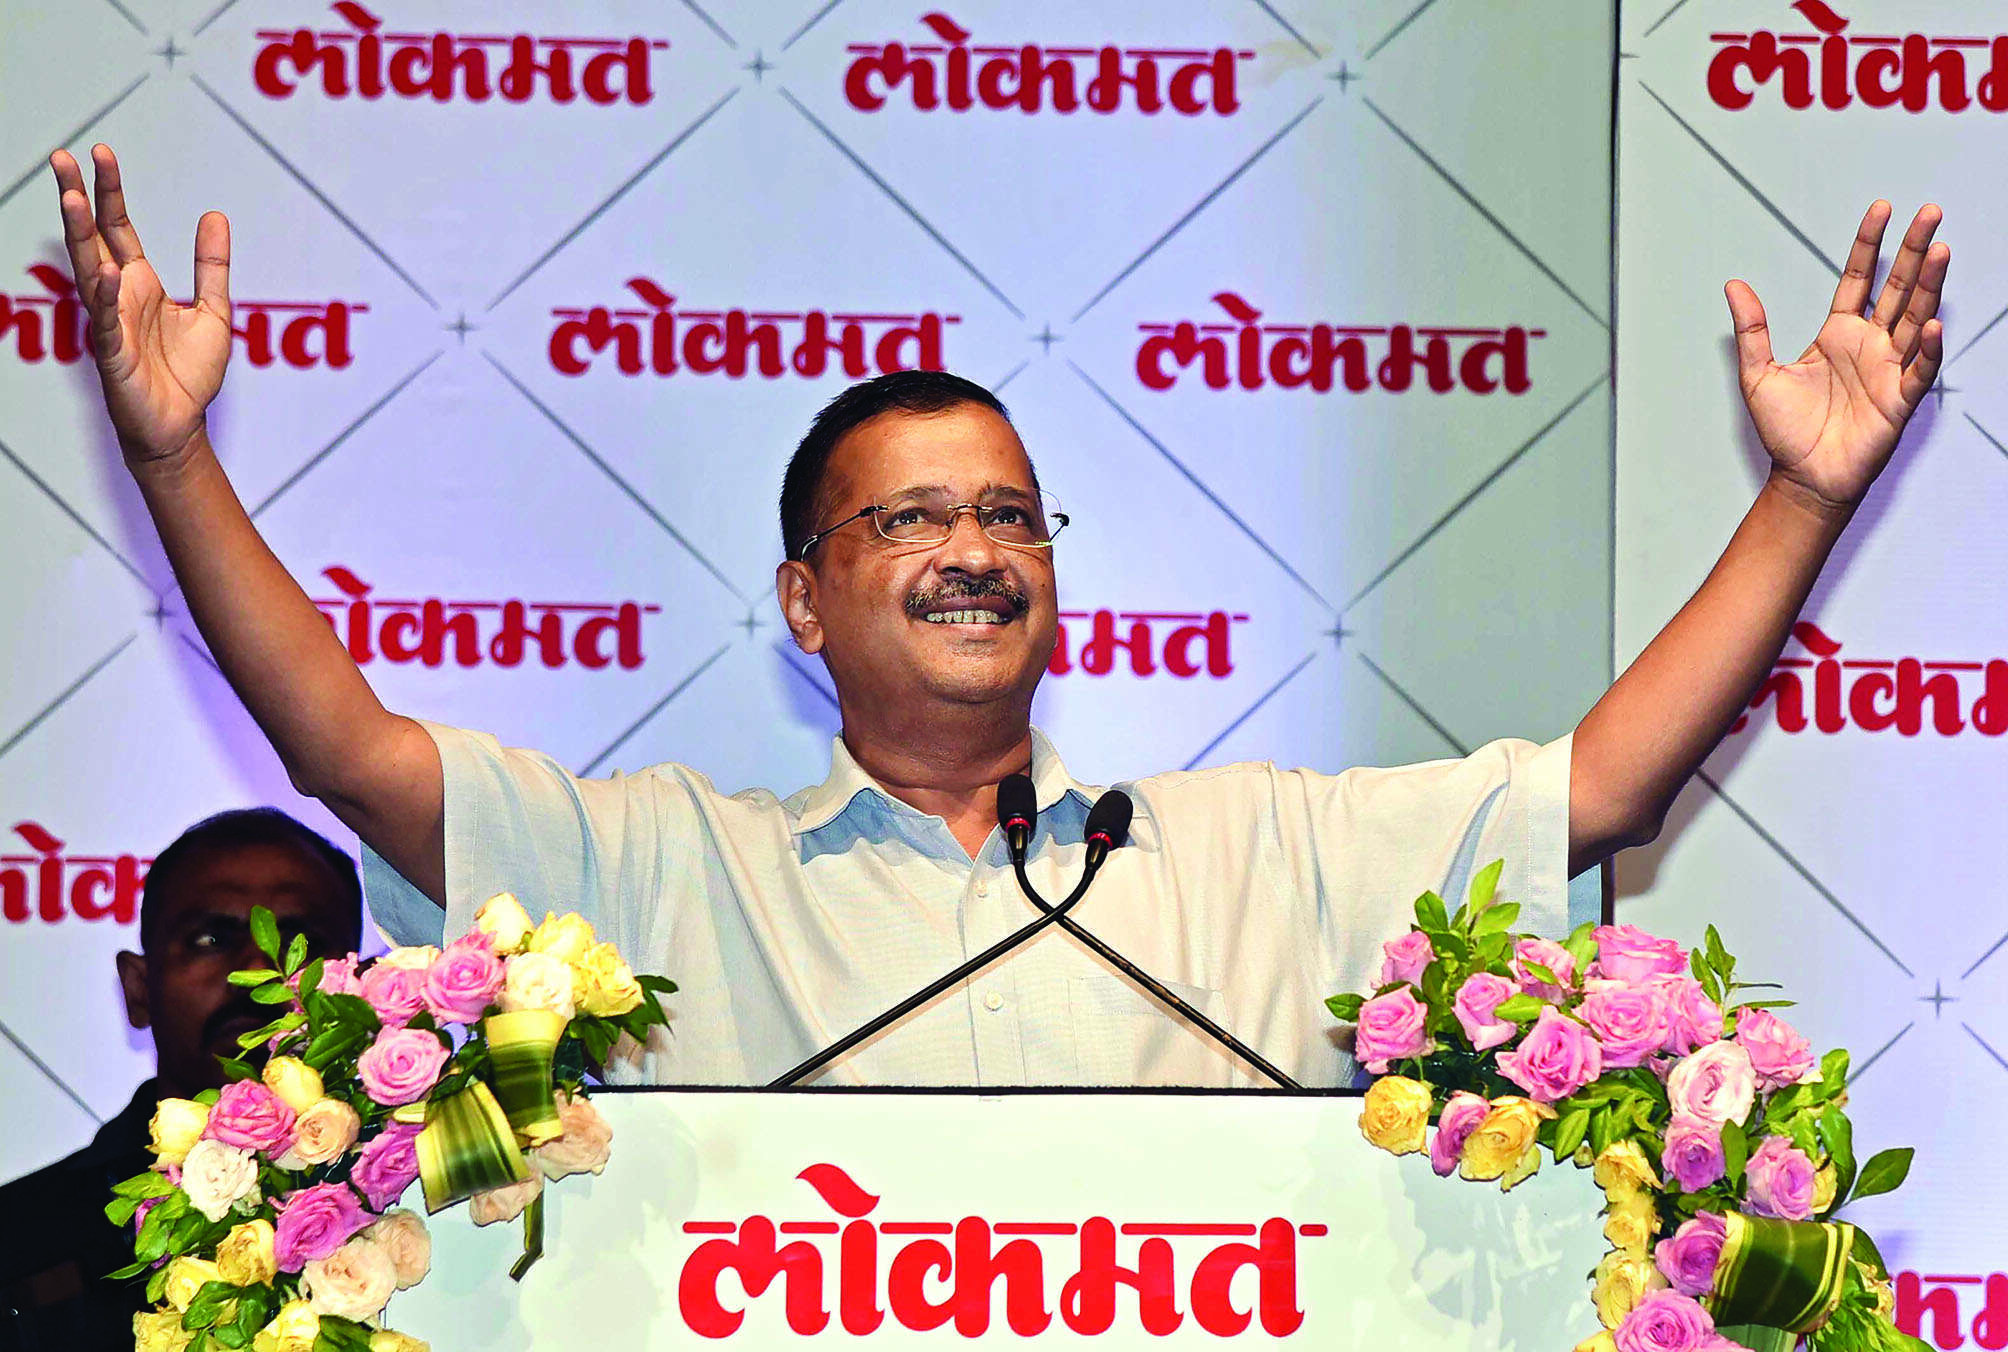 No alliances with parties, want to partner 130 cr Indians: Kejriwal